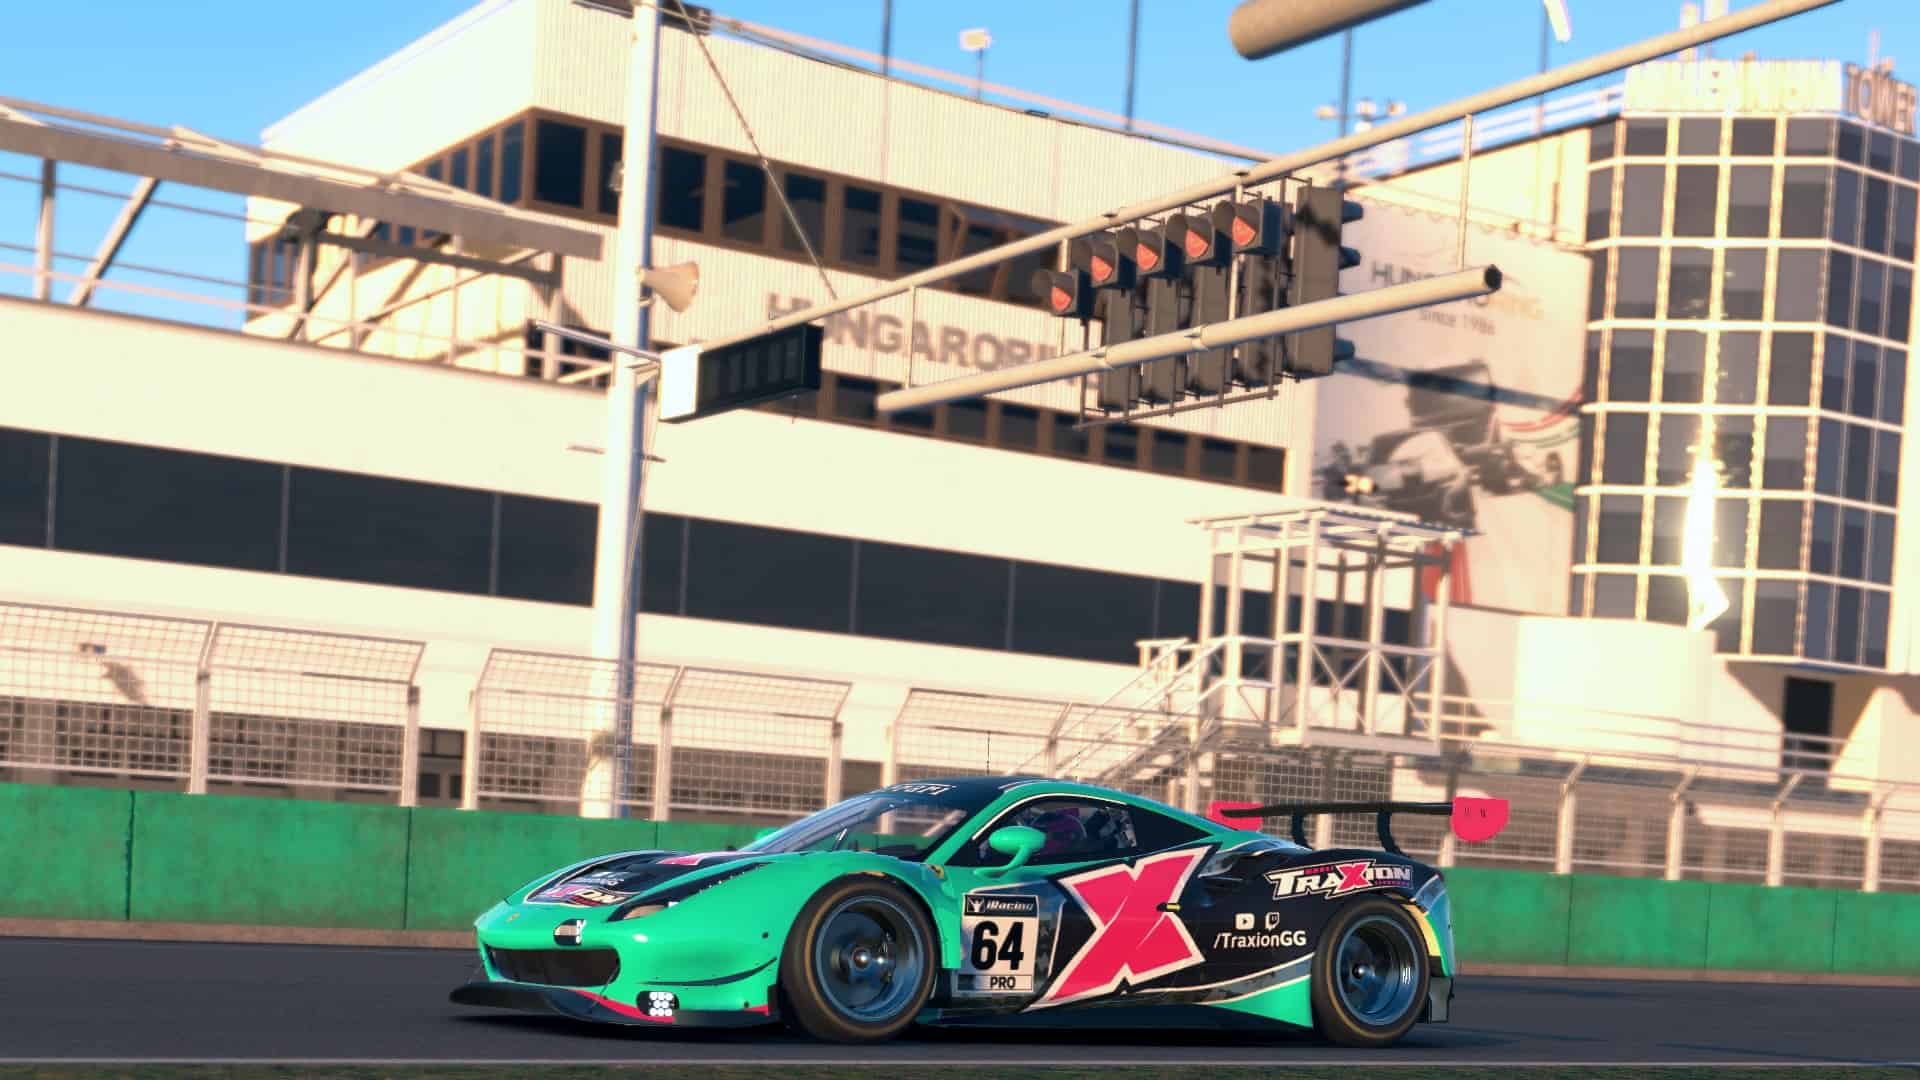 Hands on with iRacing: New and updated 2021 Season 4 content